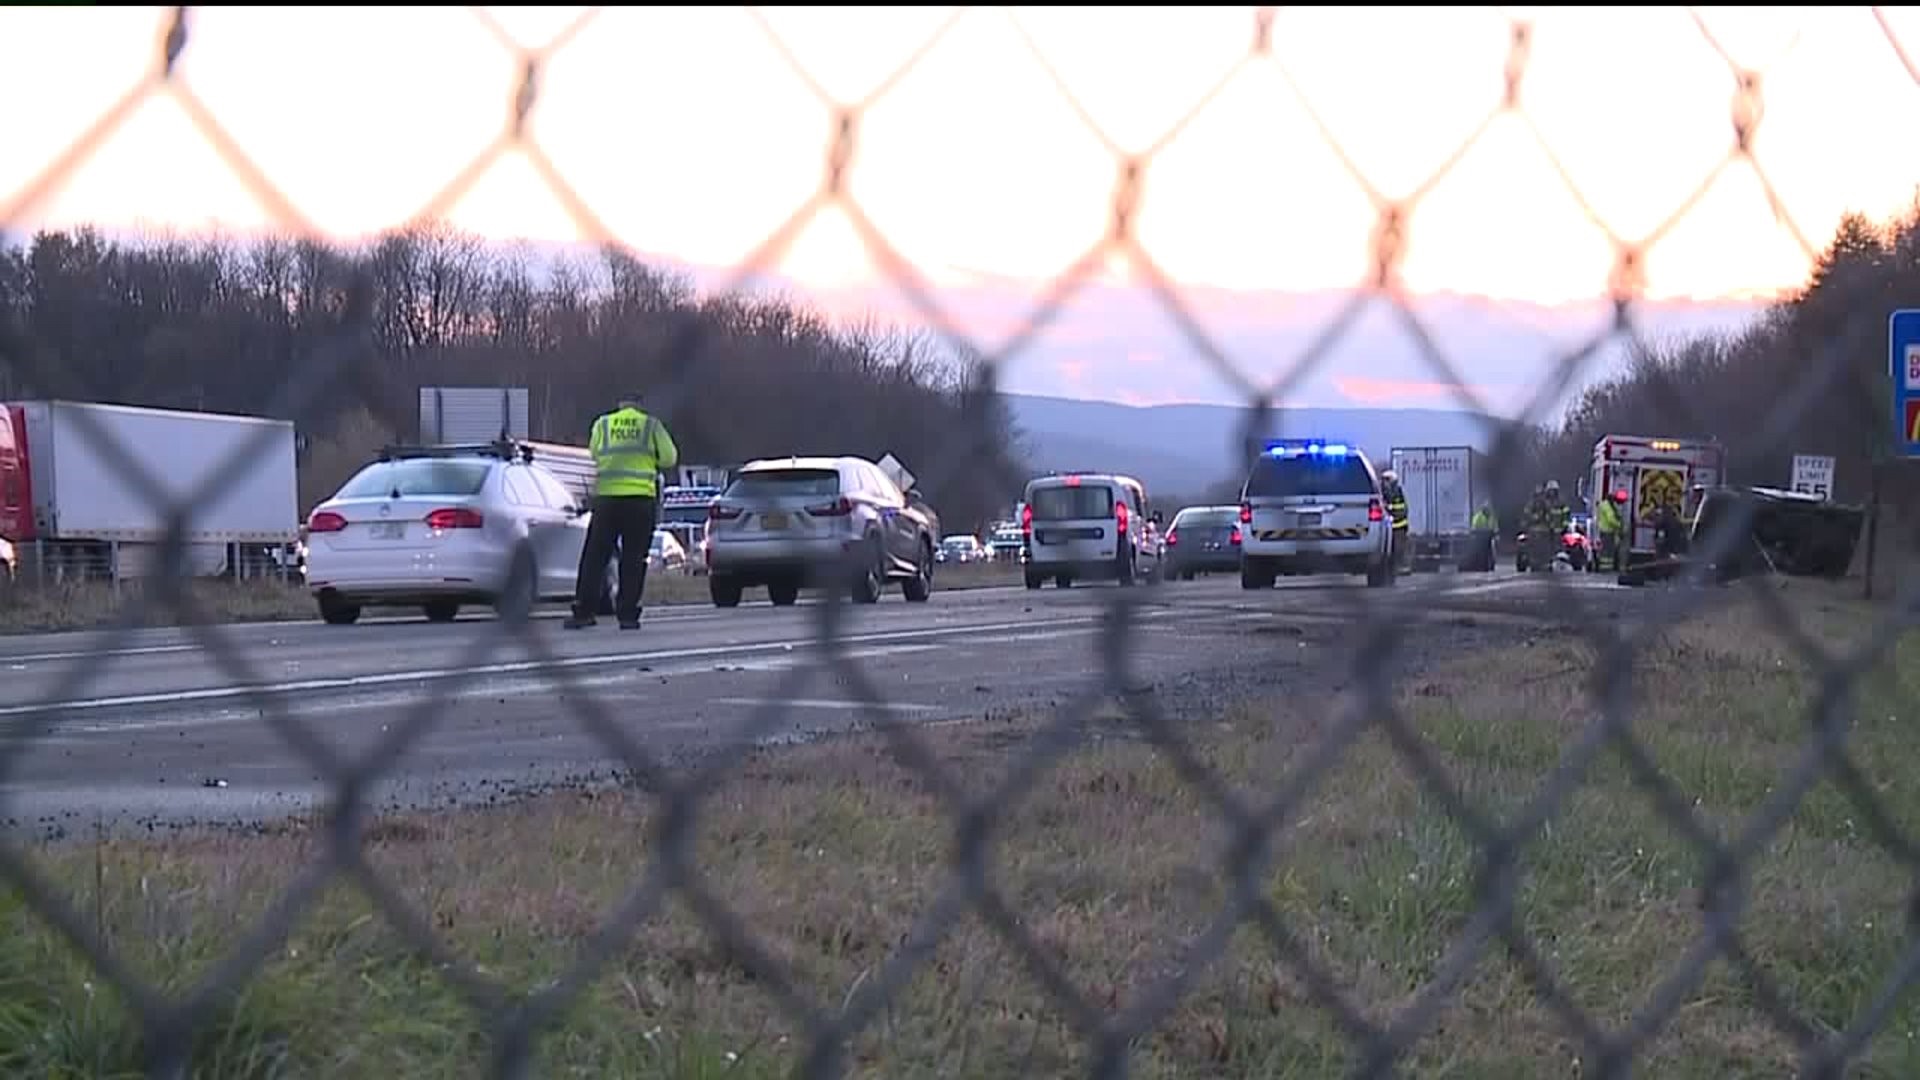 UPDATE: Ten People Injured After Crash on 81 South